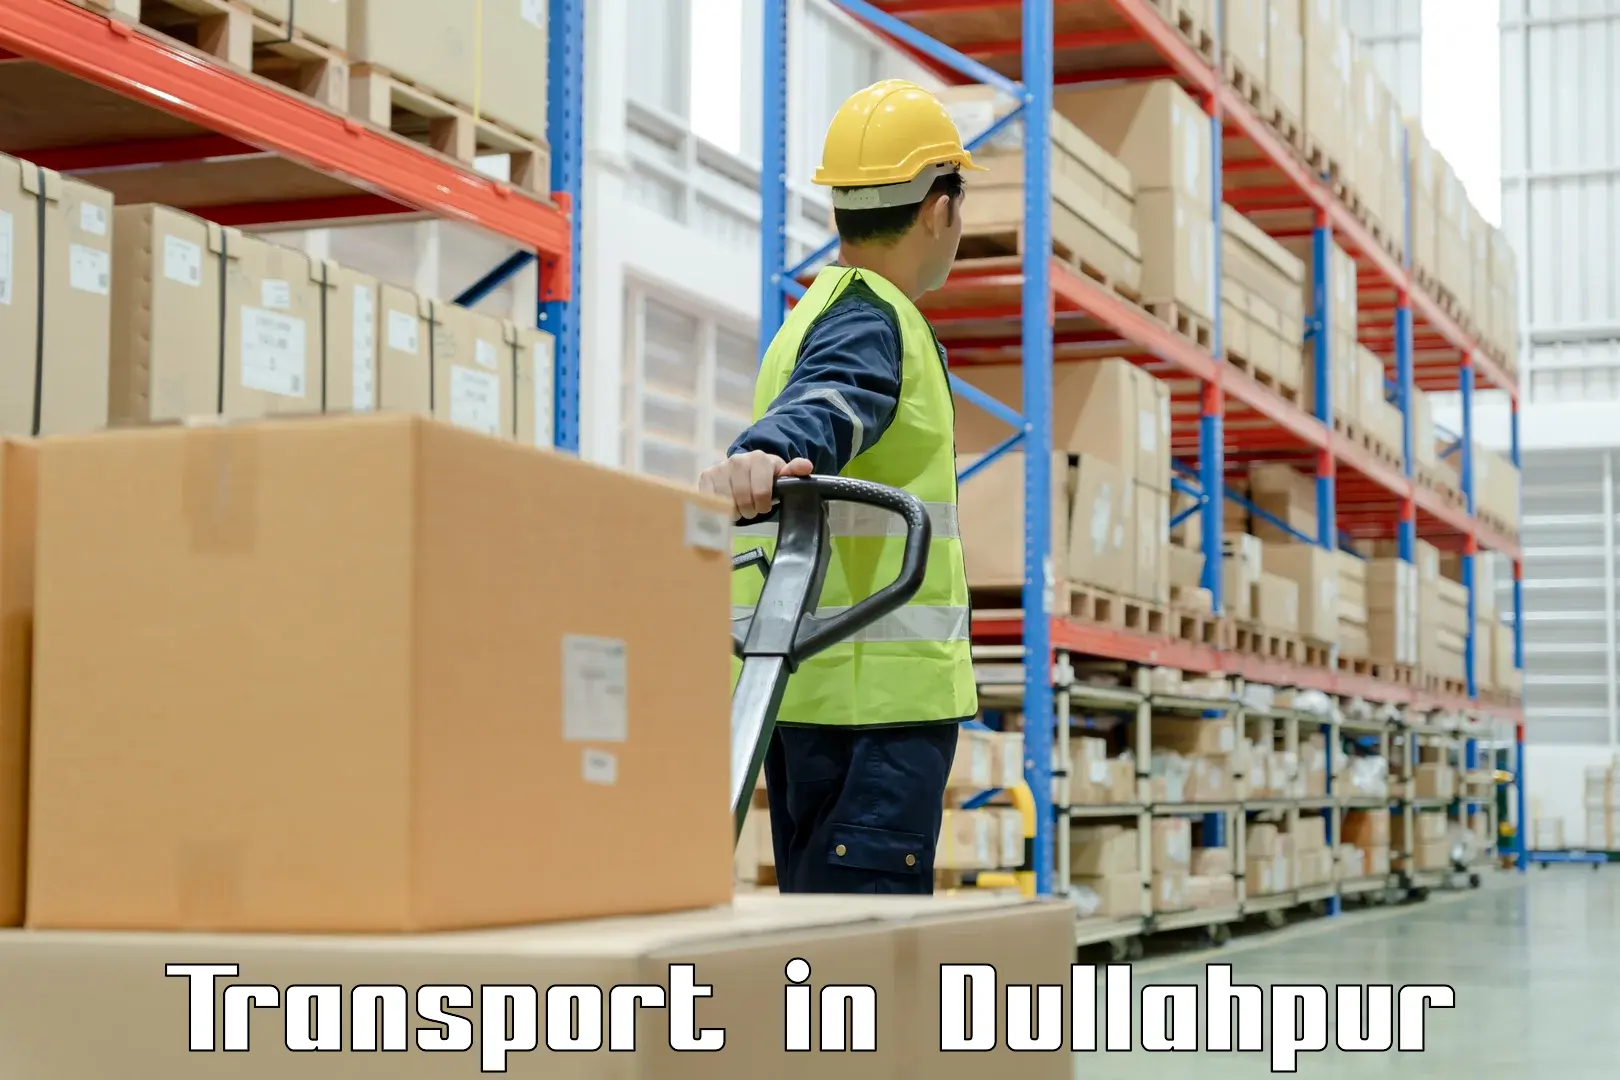 Vehicle transport services in Dullahpur